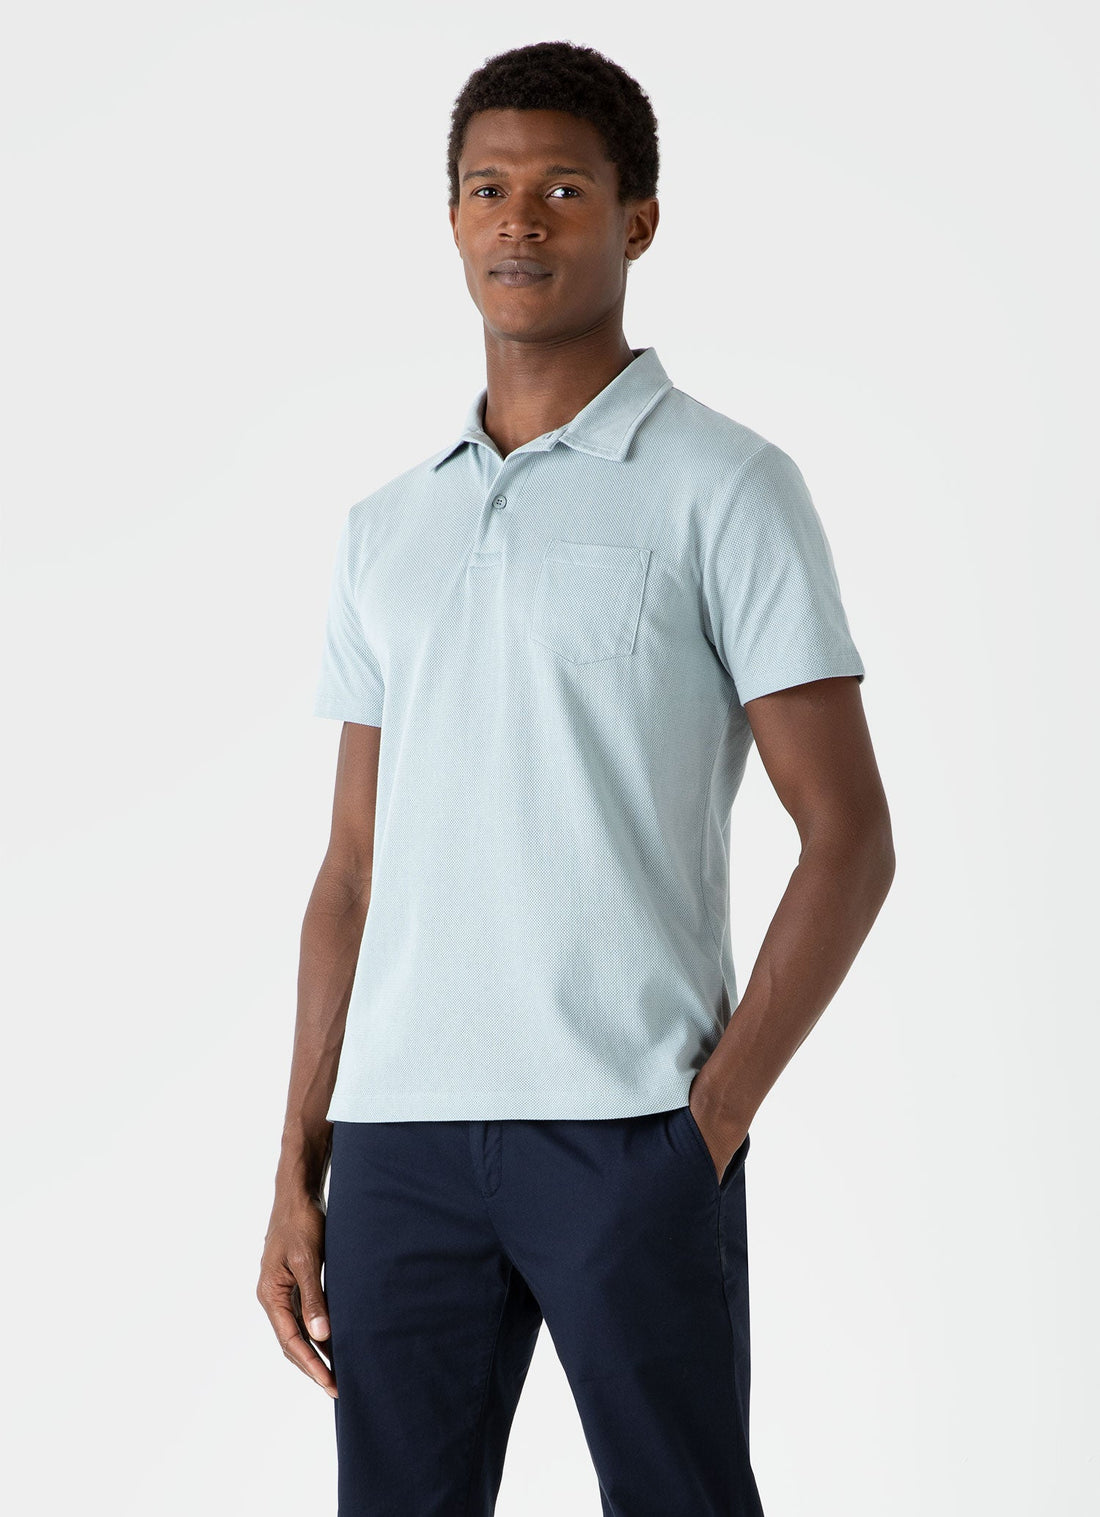 Men's Riviera Polo Shirt in Blue Sage